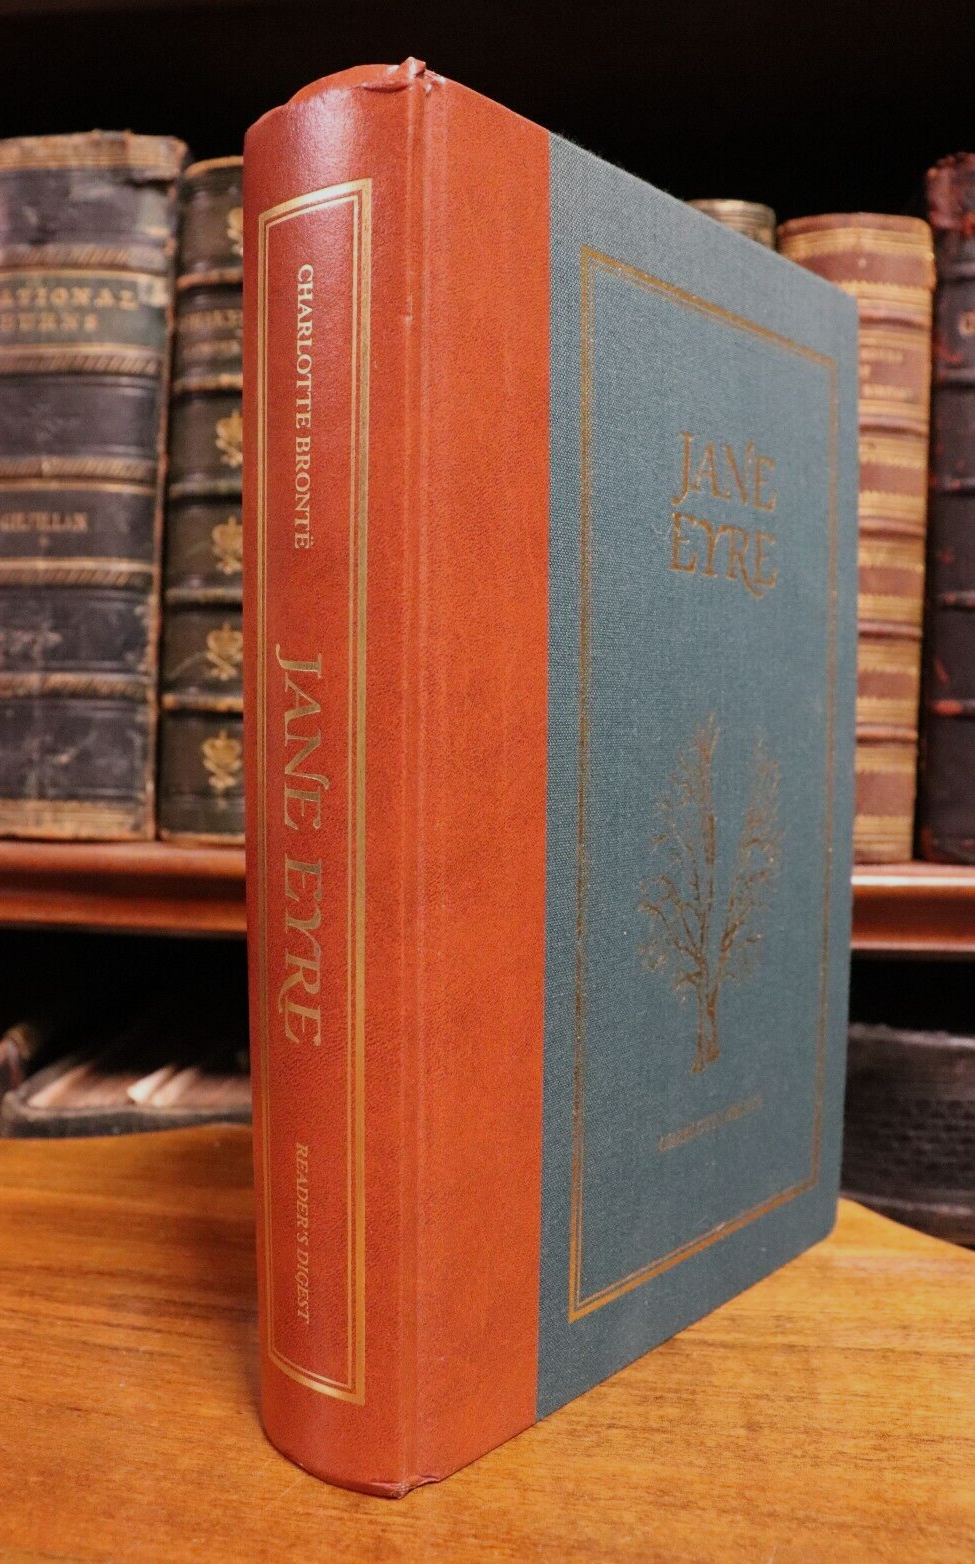 Jane Eyre by Charlotte Bronte - 2000 - Readers Digest Classic Literature Book